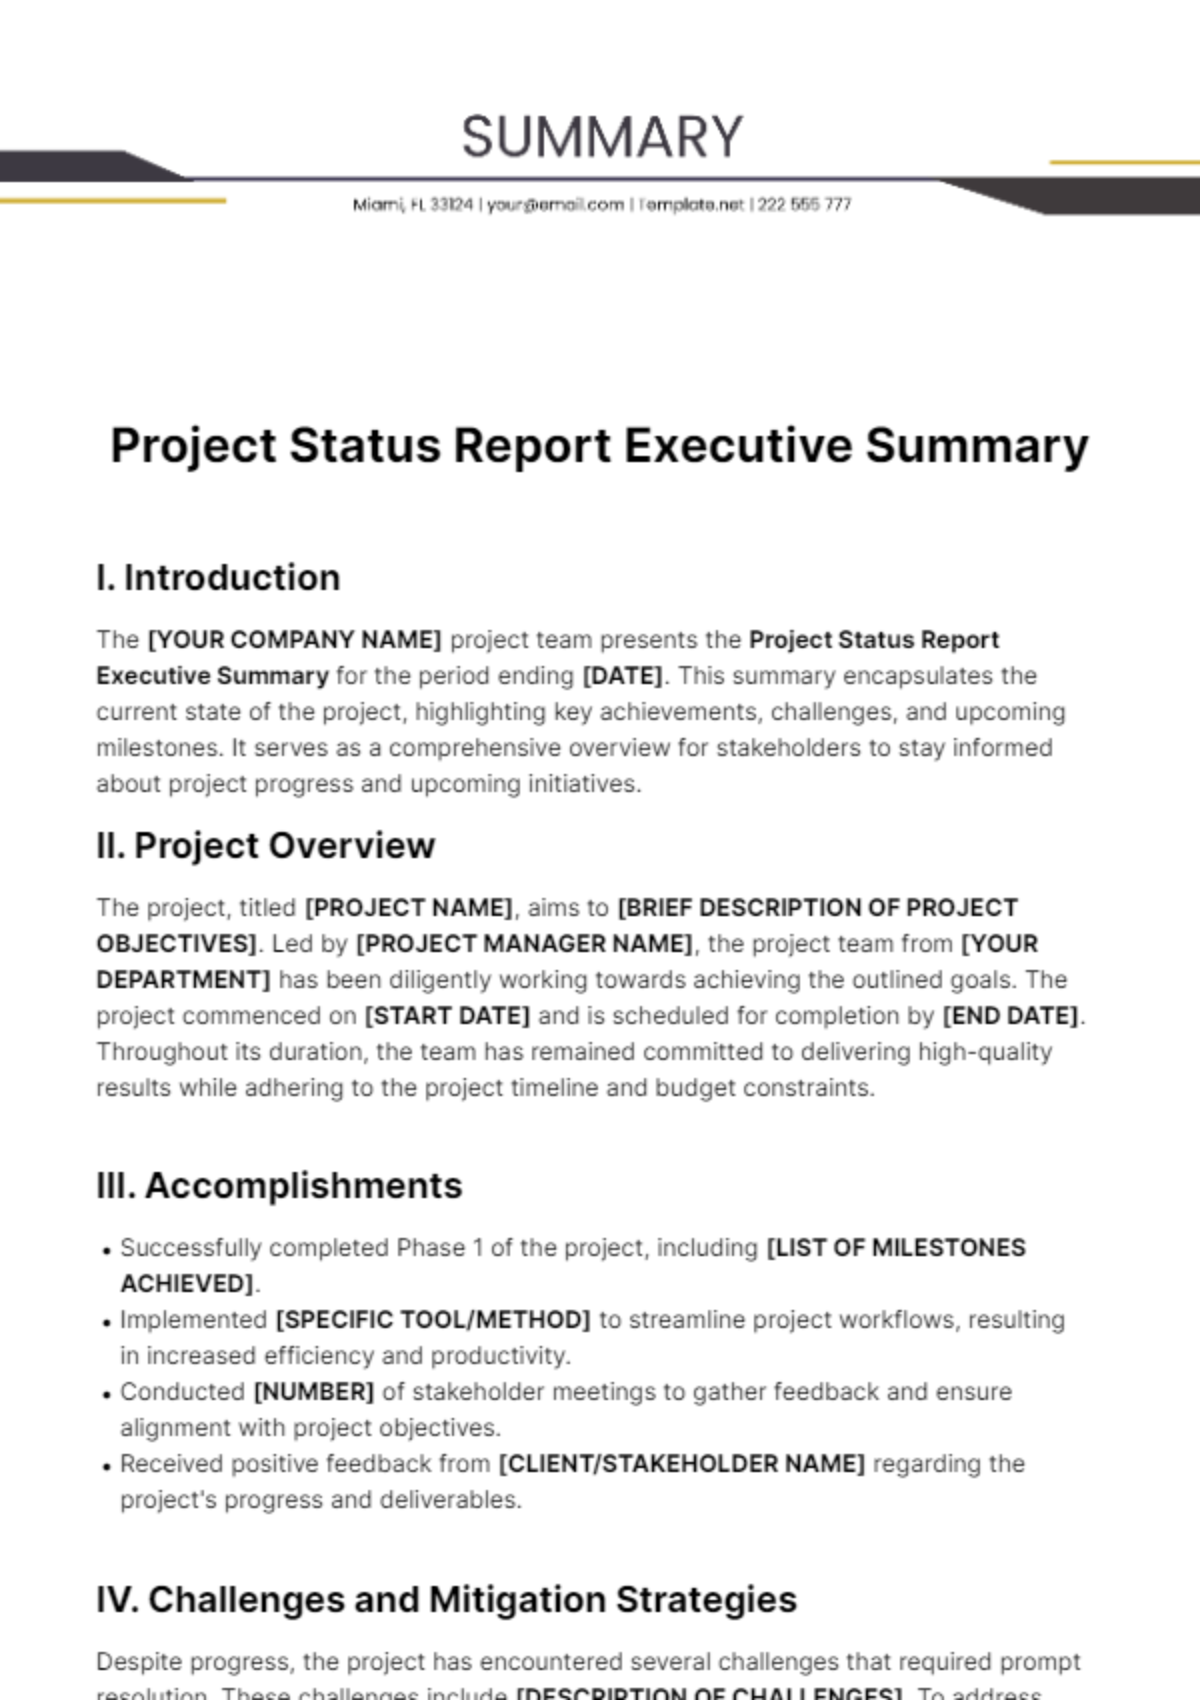 Project Status Report Executive Summary Template